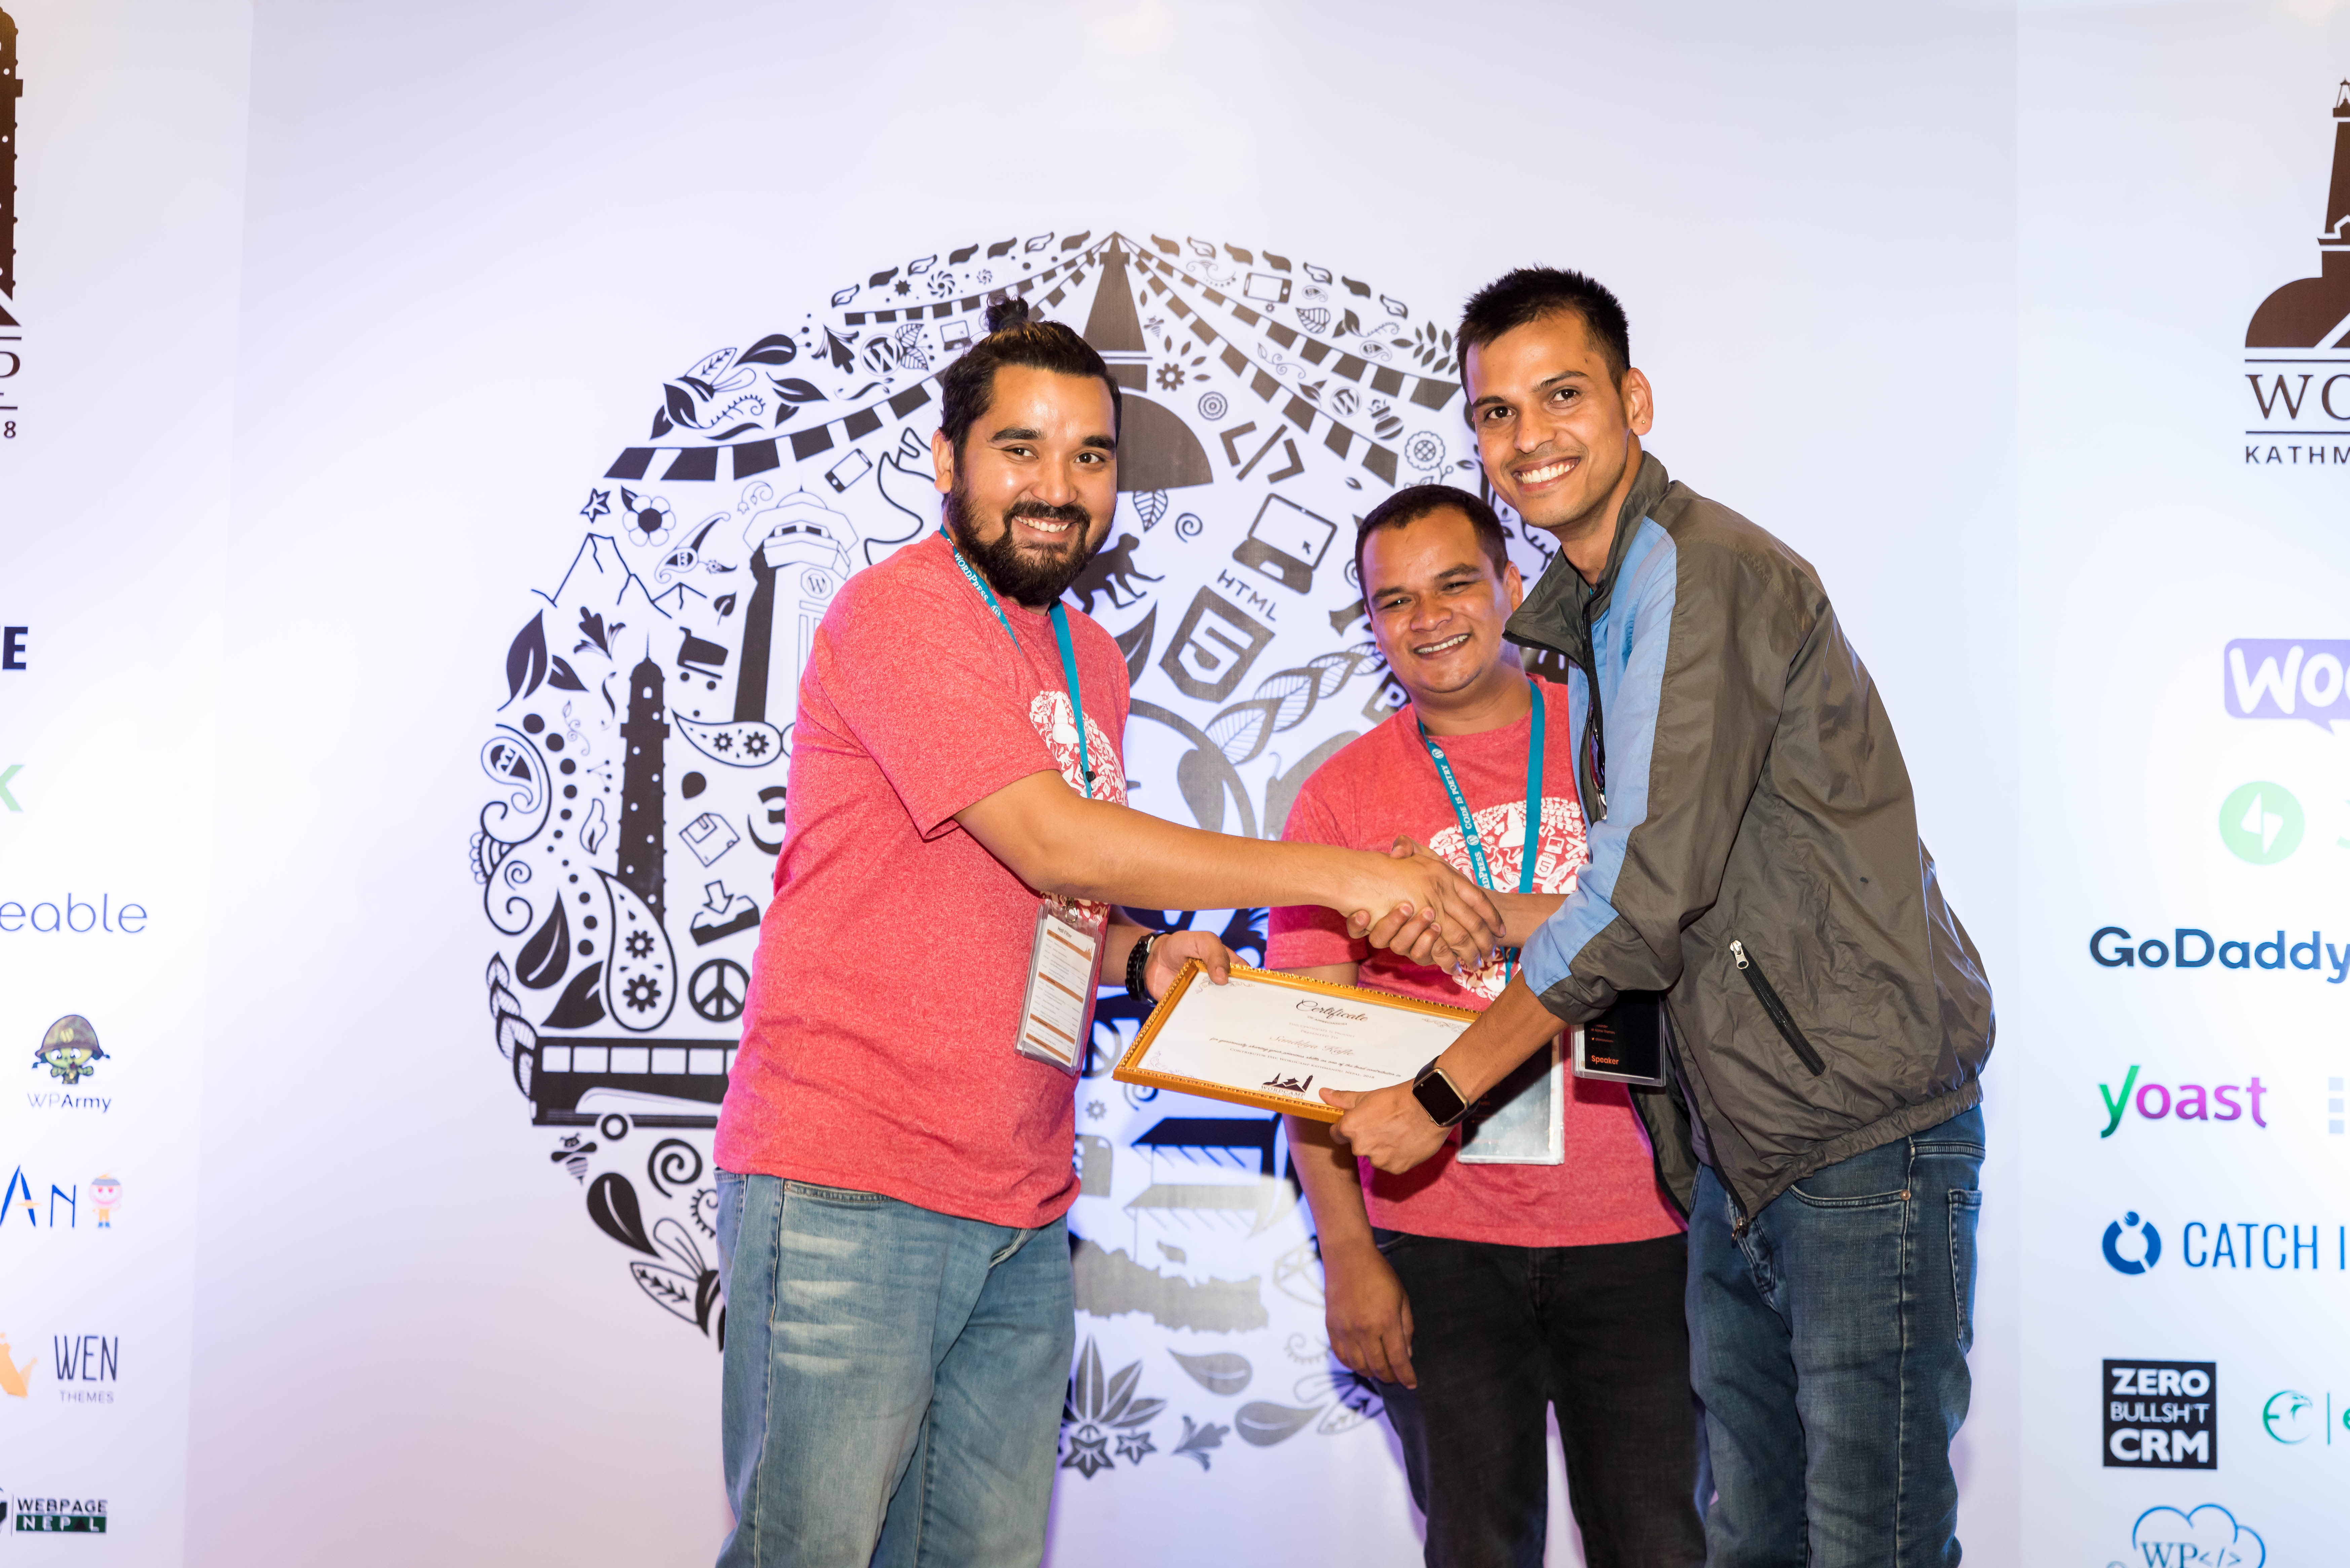 Contribution day of WordCamp Kathmandu 2018 – Opportunity, Challenges and Achievement